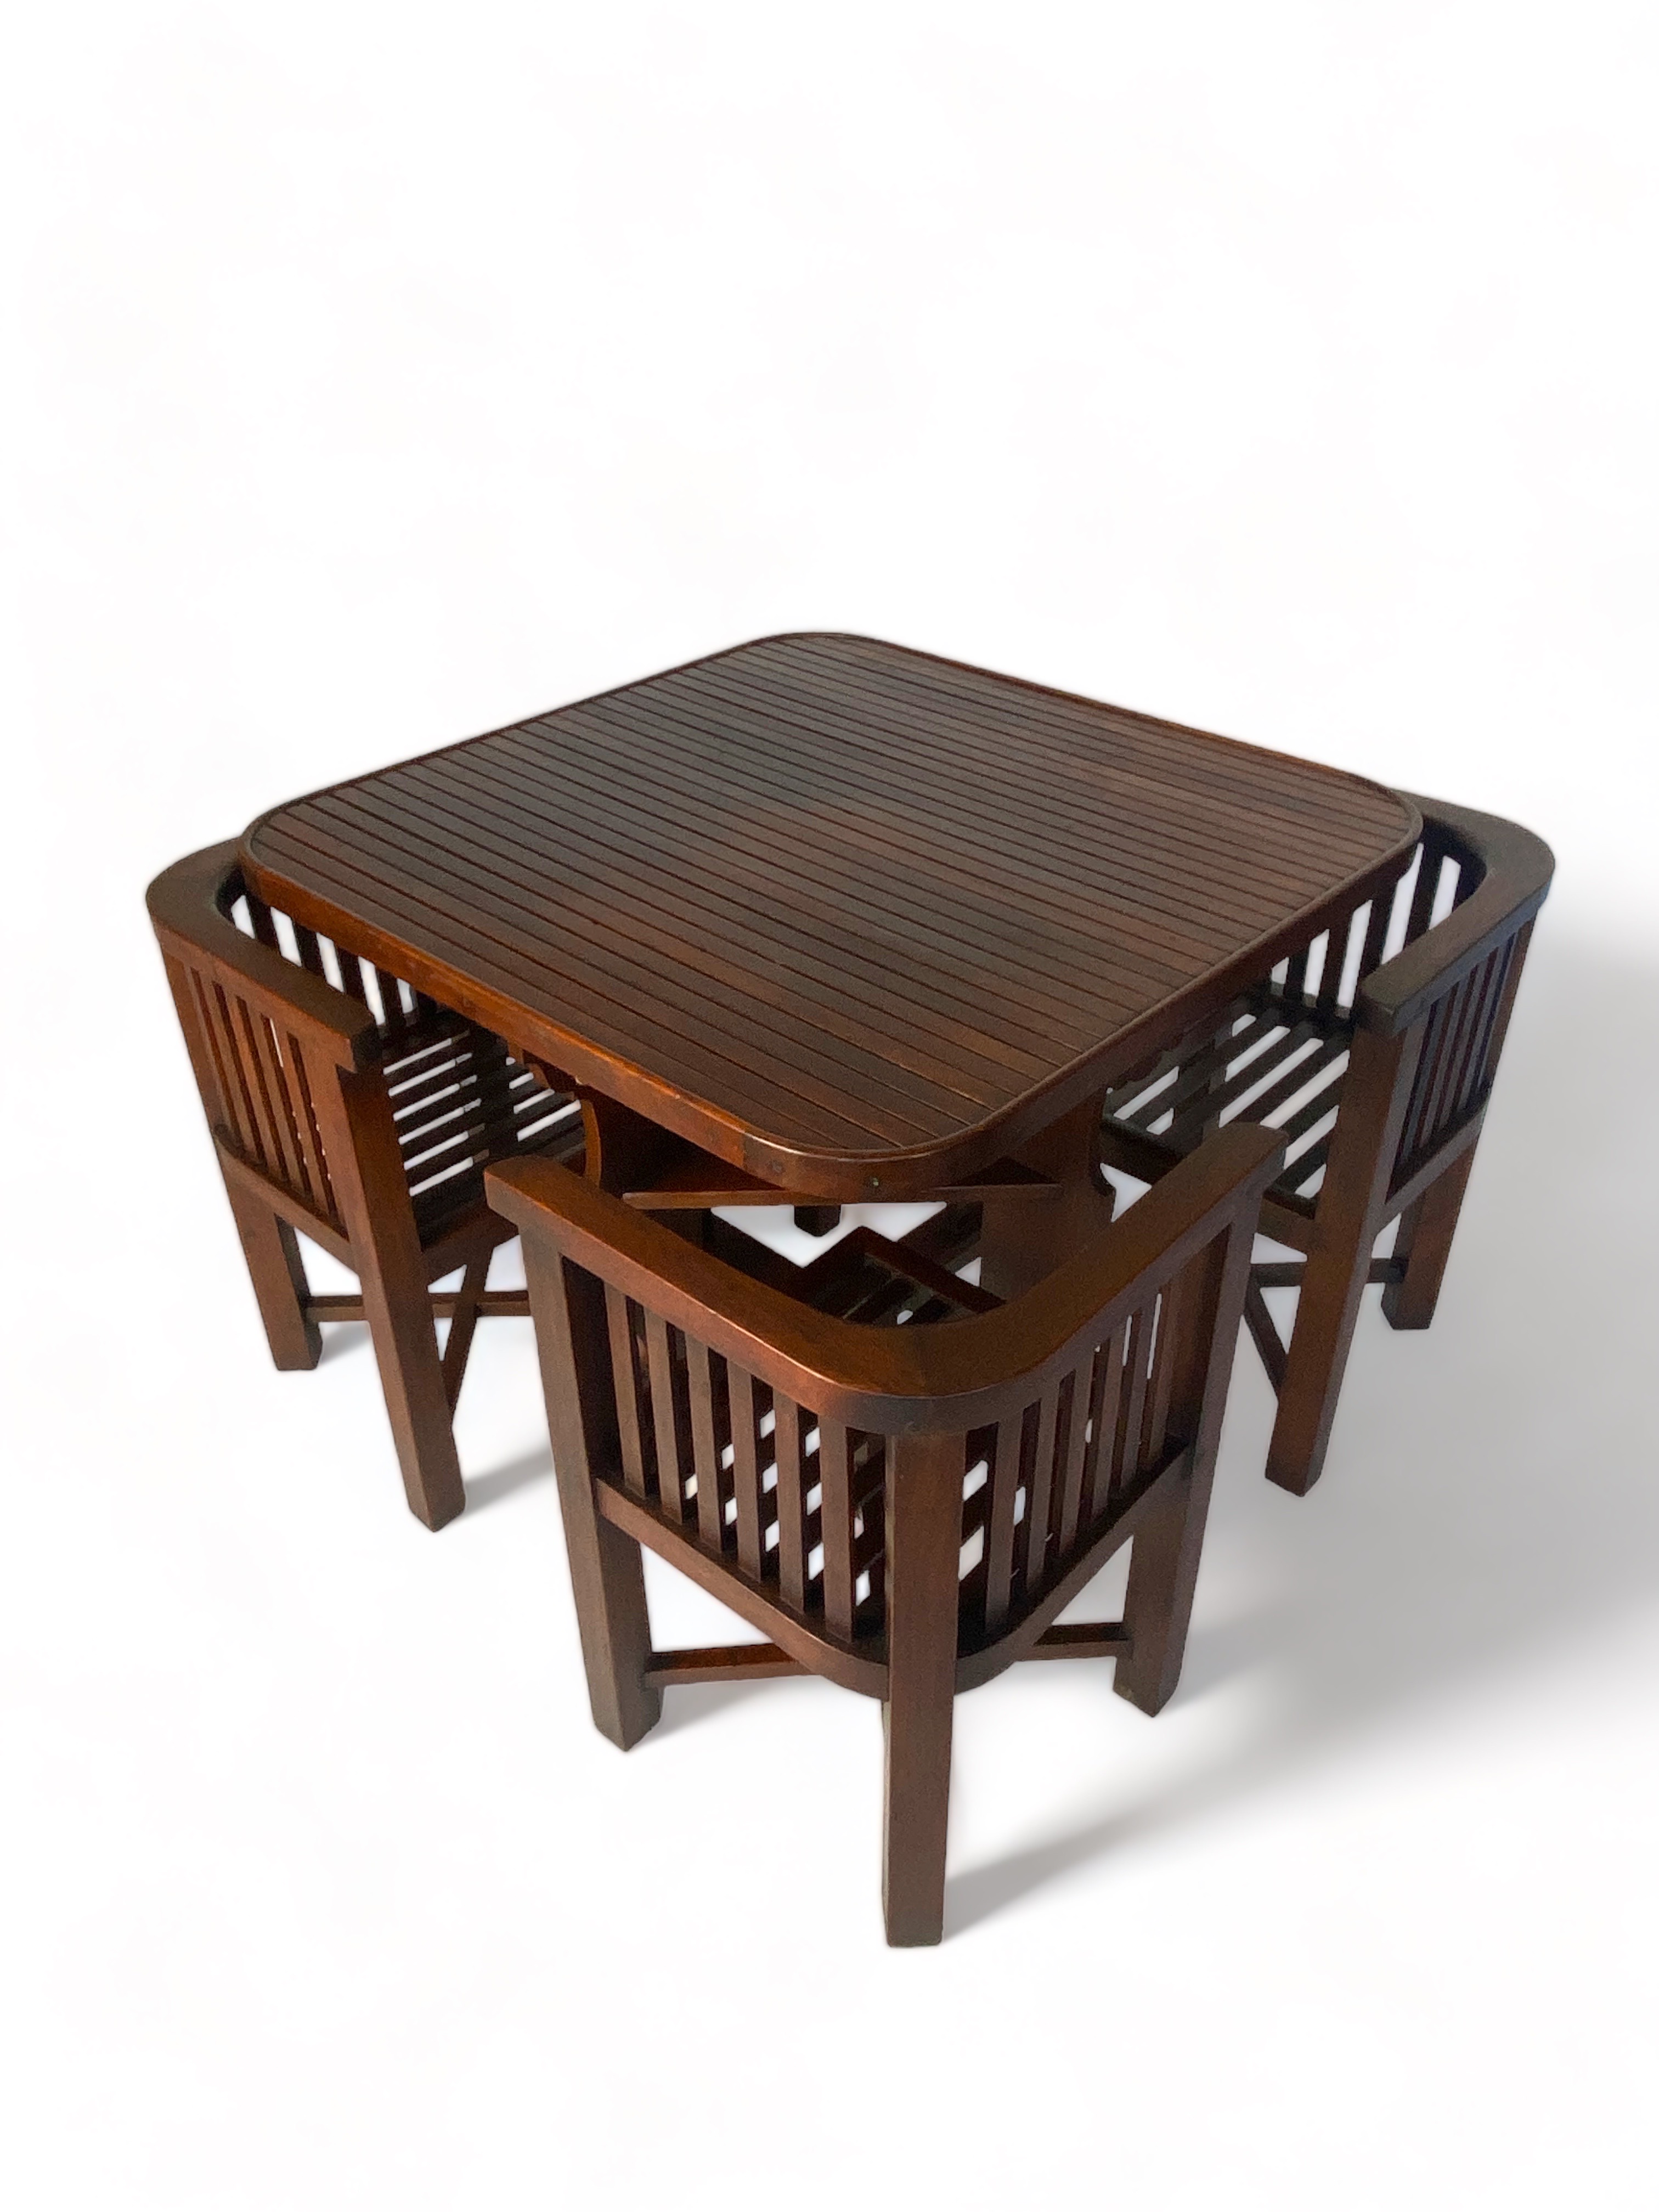 A 1930's Art Deco teak Collingwood design garden set of table and chairs by Castle's of London proba - Image 6 of 8